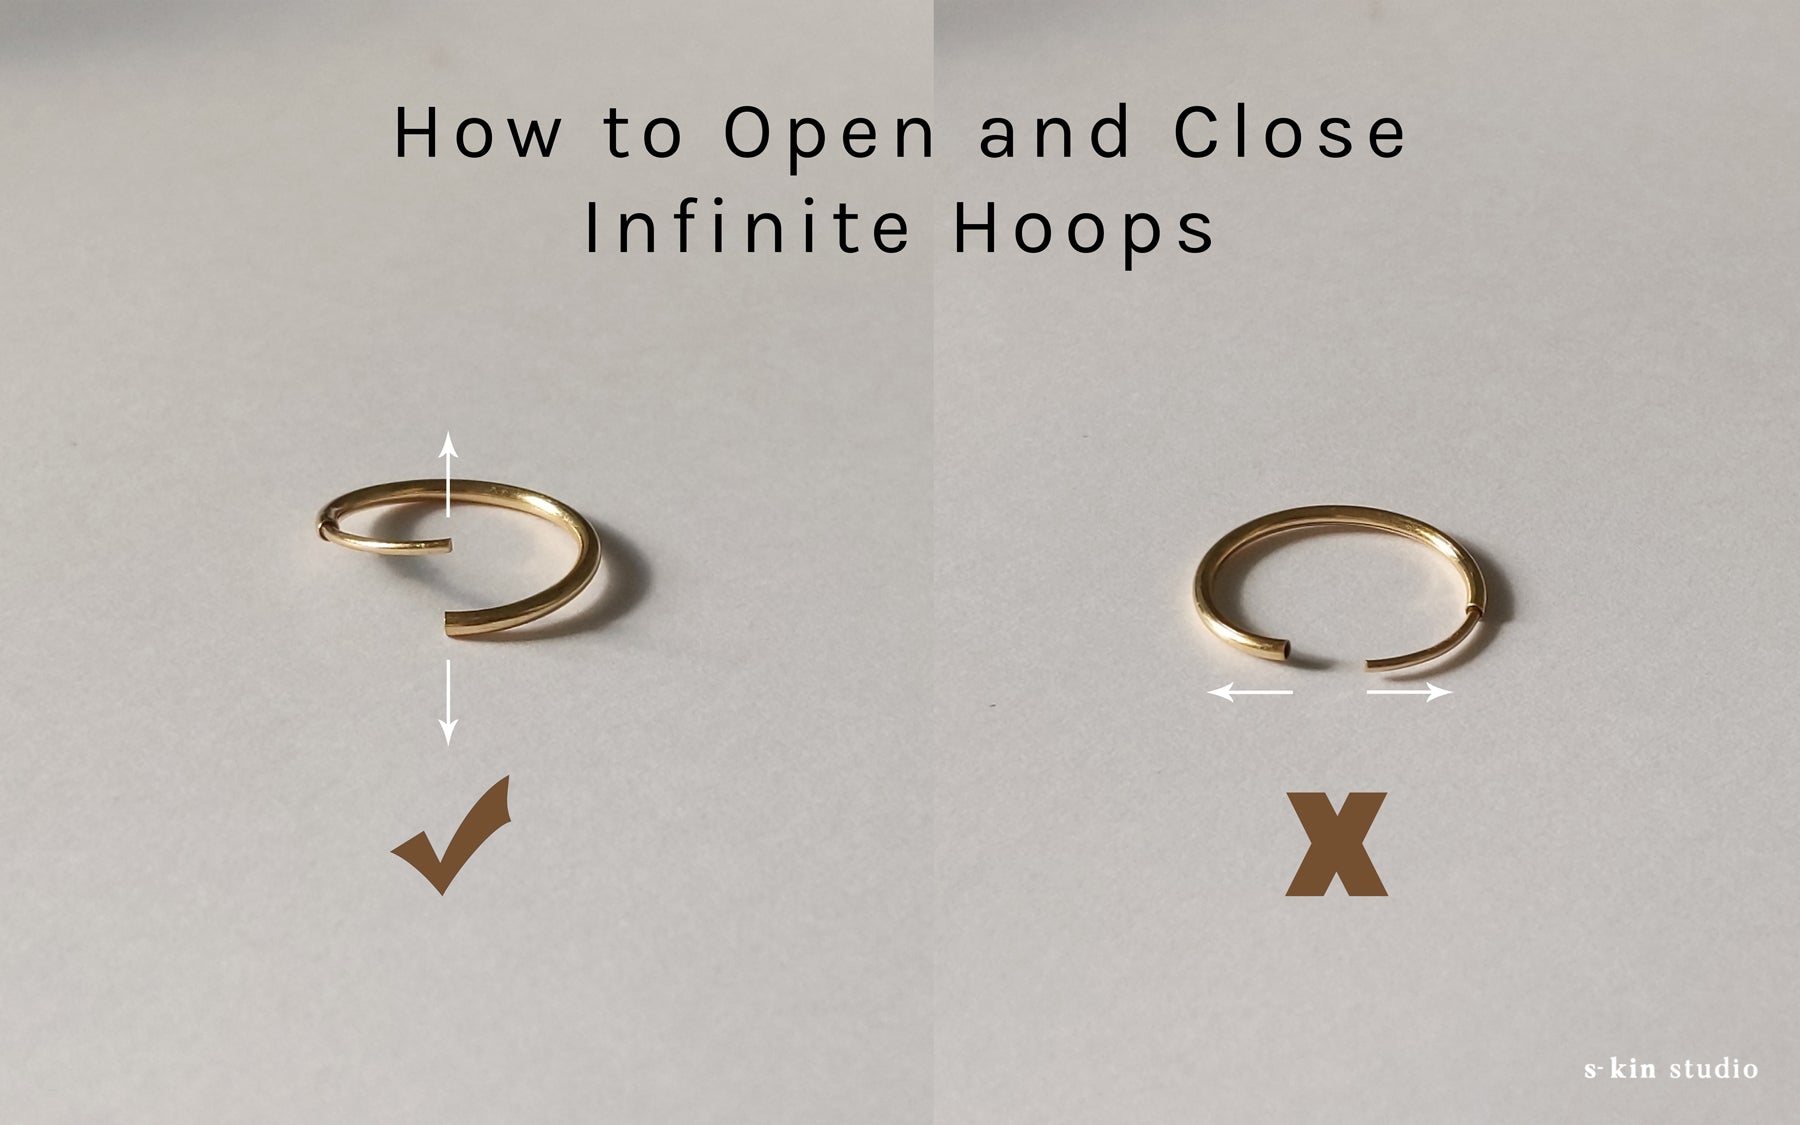 How to put in our Tiny Twist earrings. One earring, two little hoops.